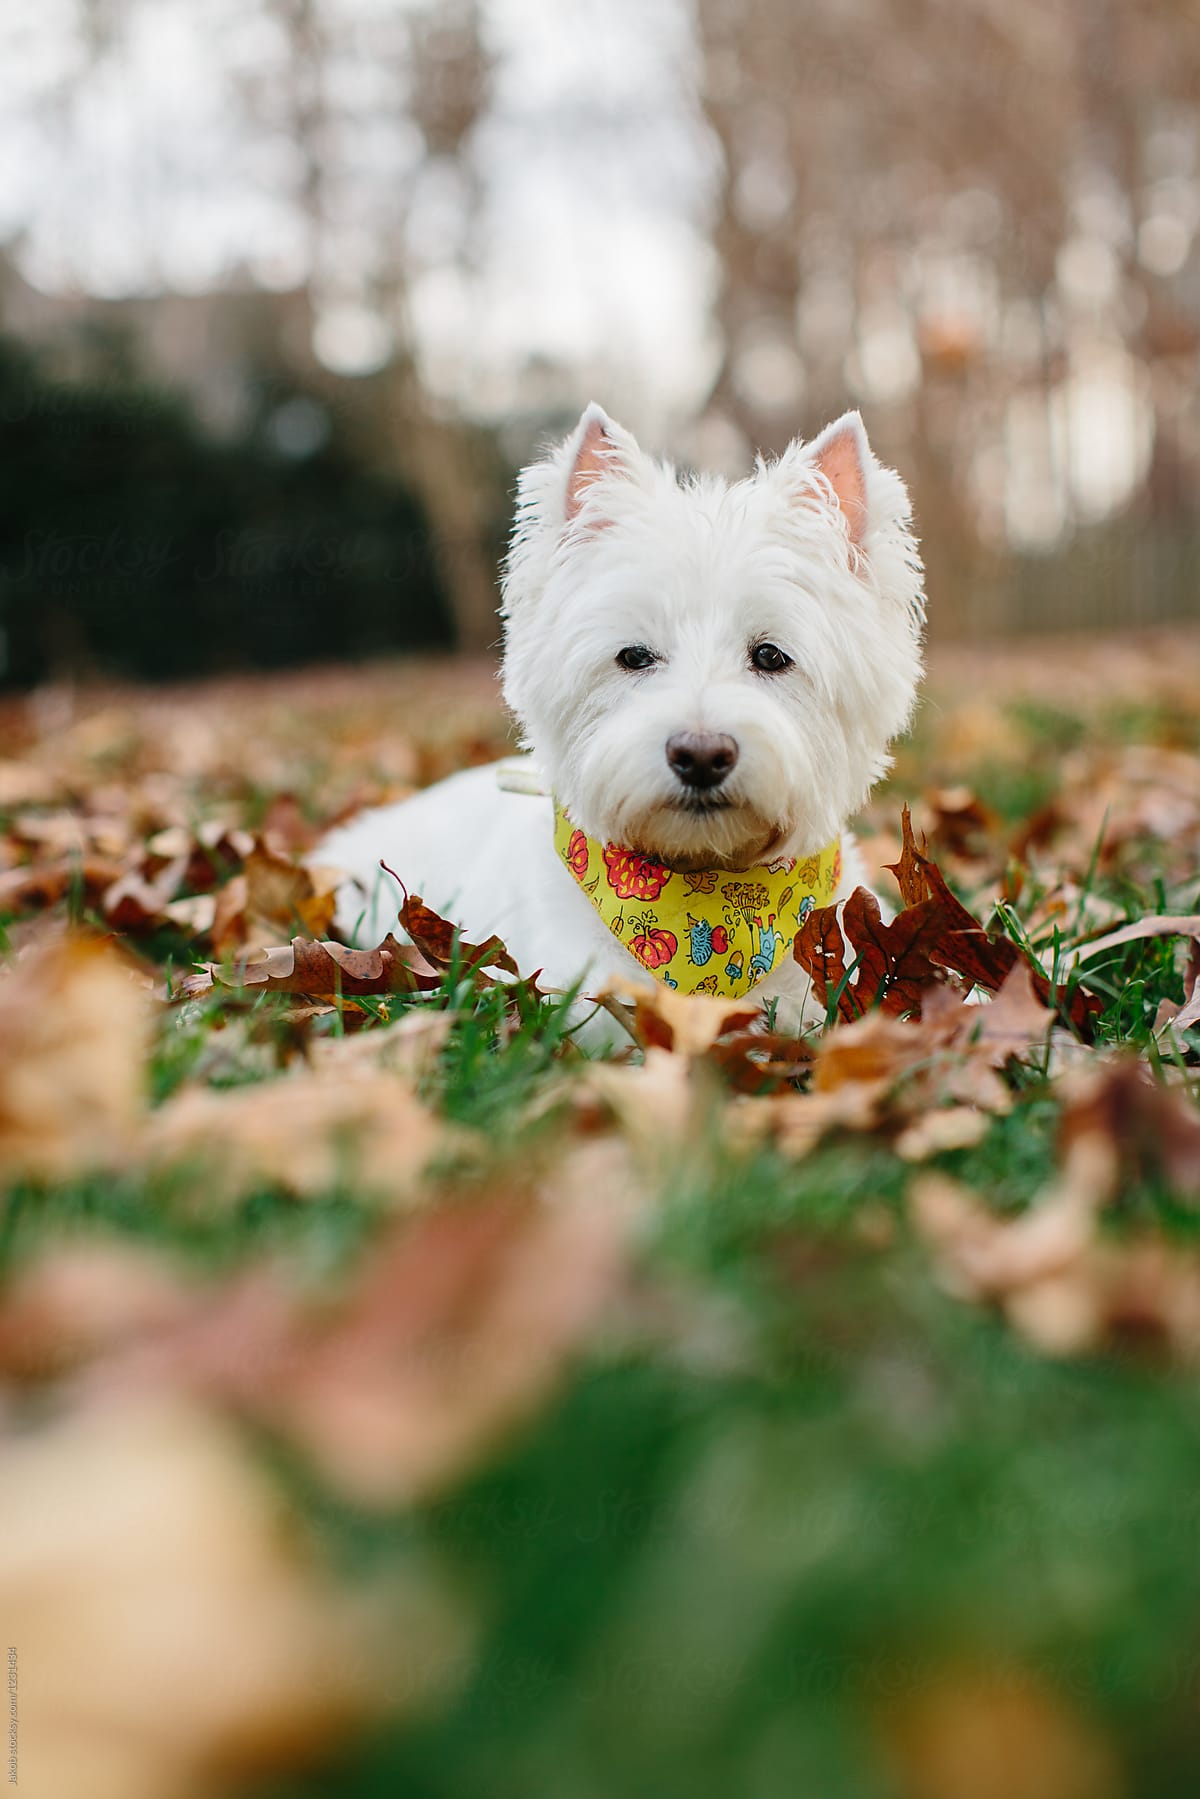 Cute white dog lying in grass and fallen leaves